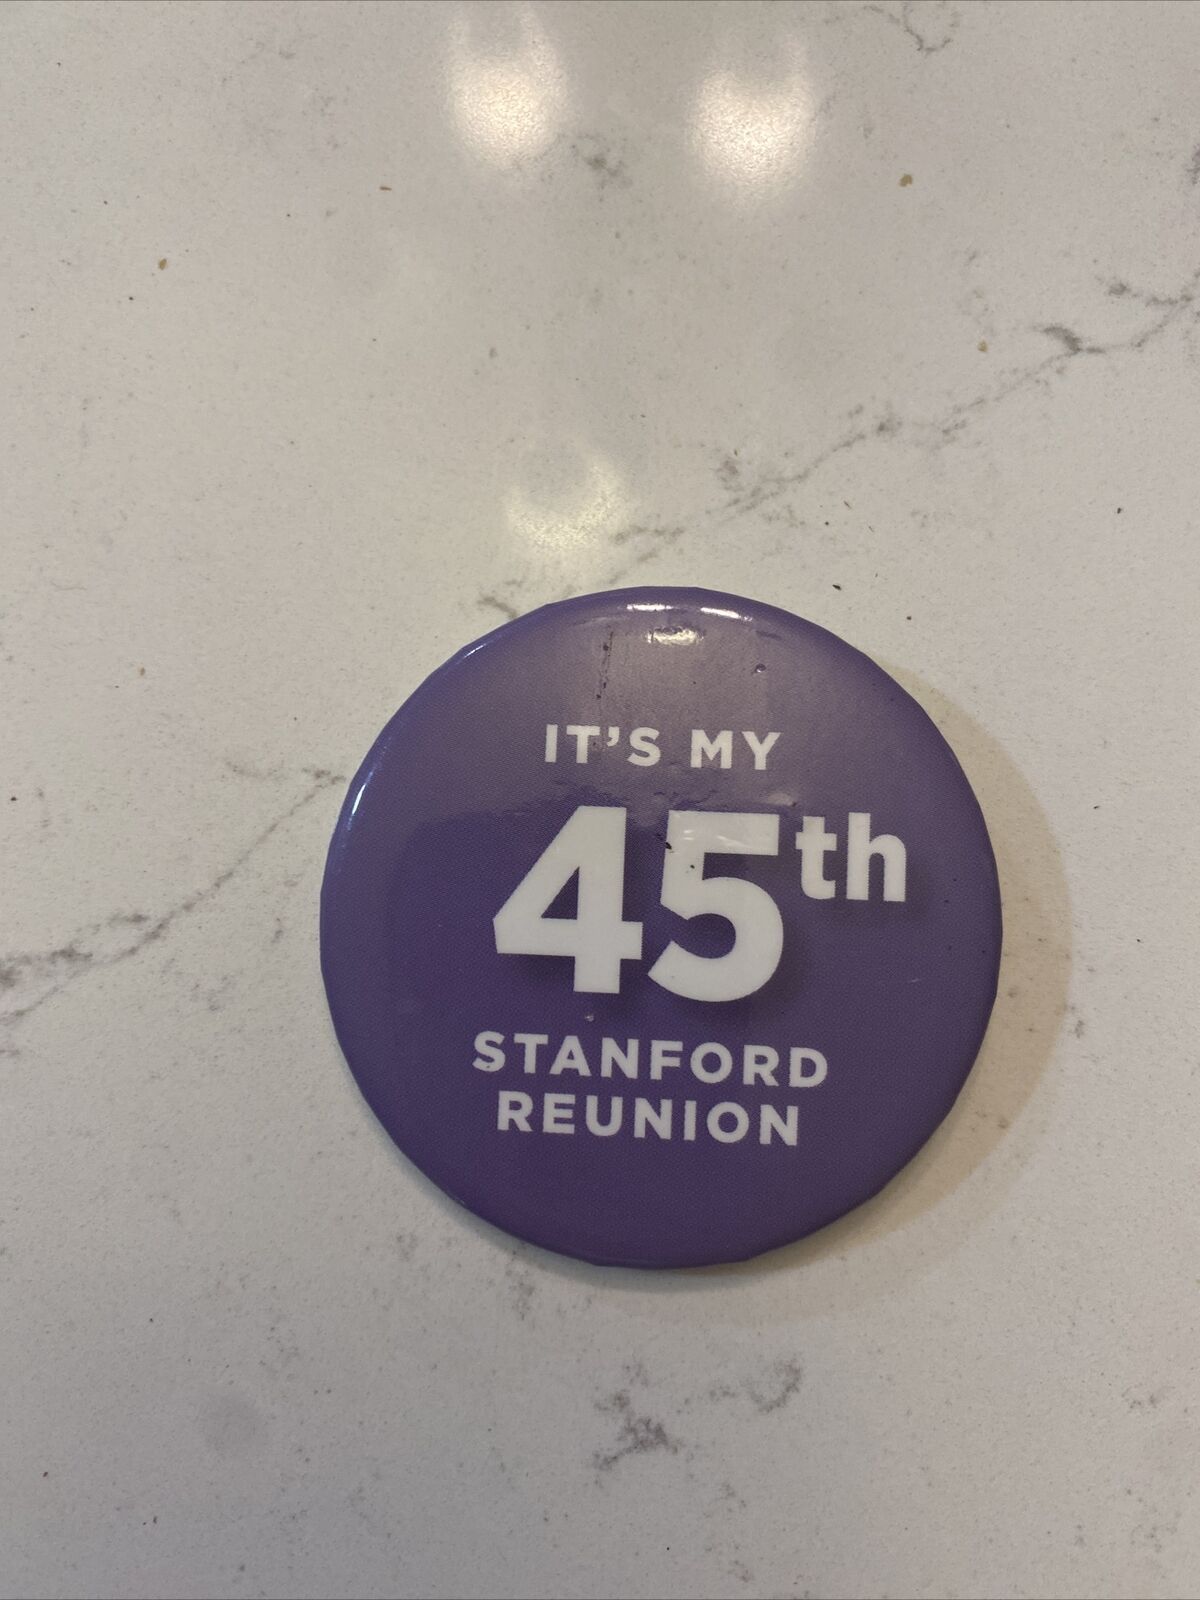 It’s My 45th Stanford Reunion 